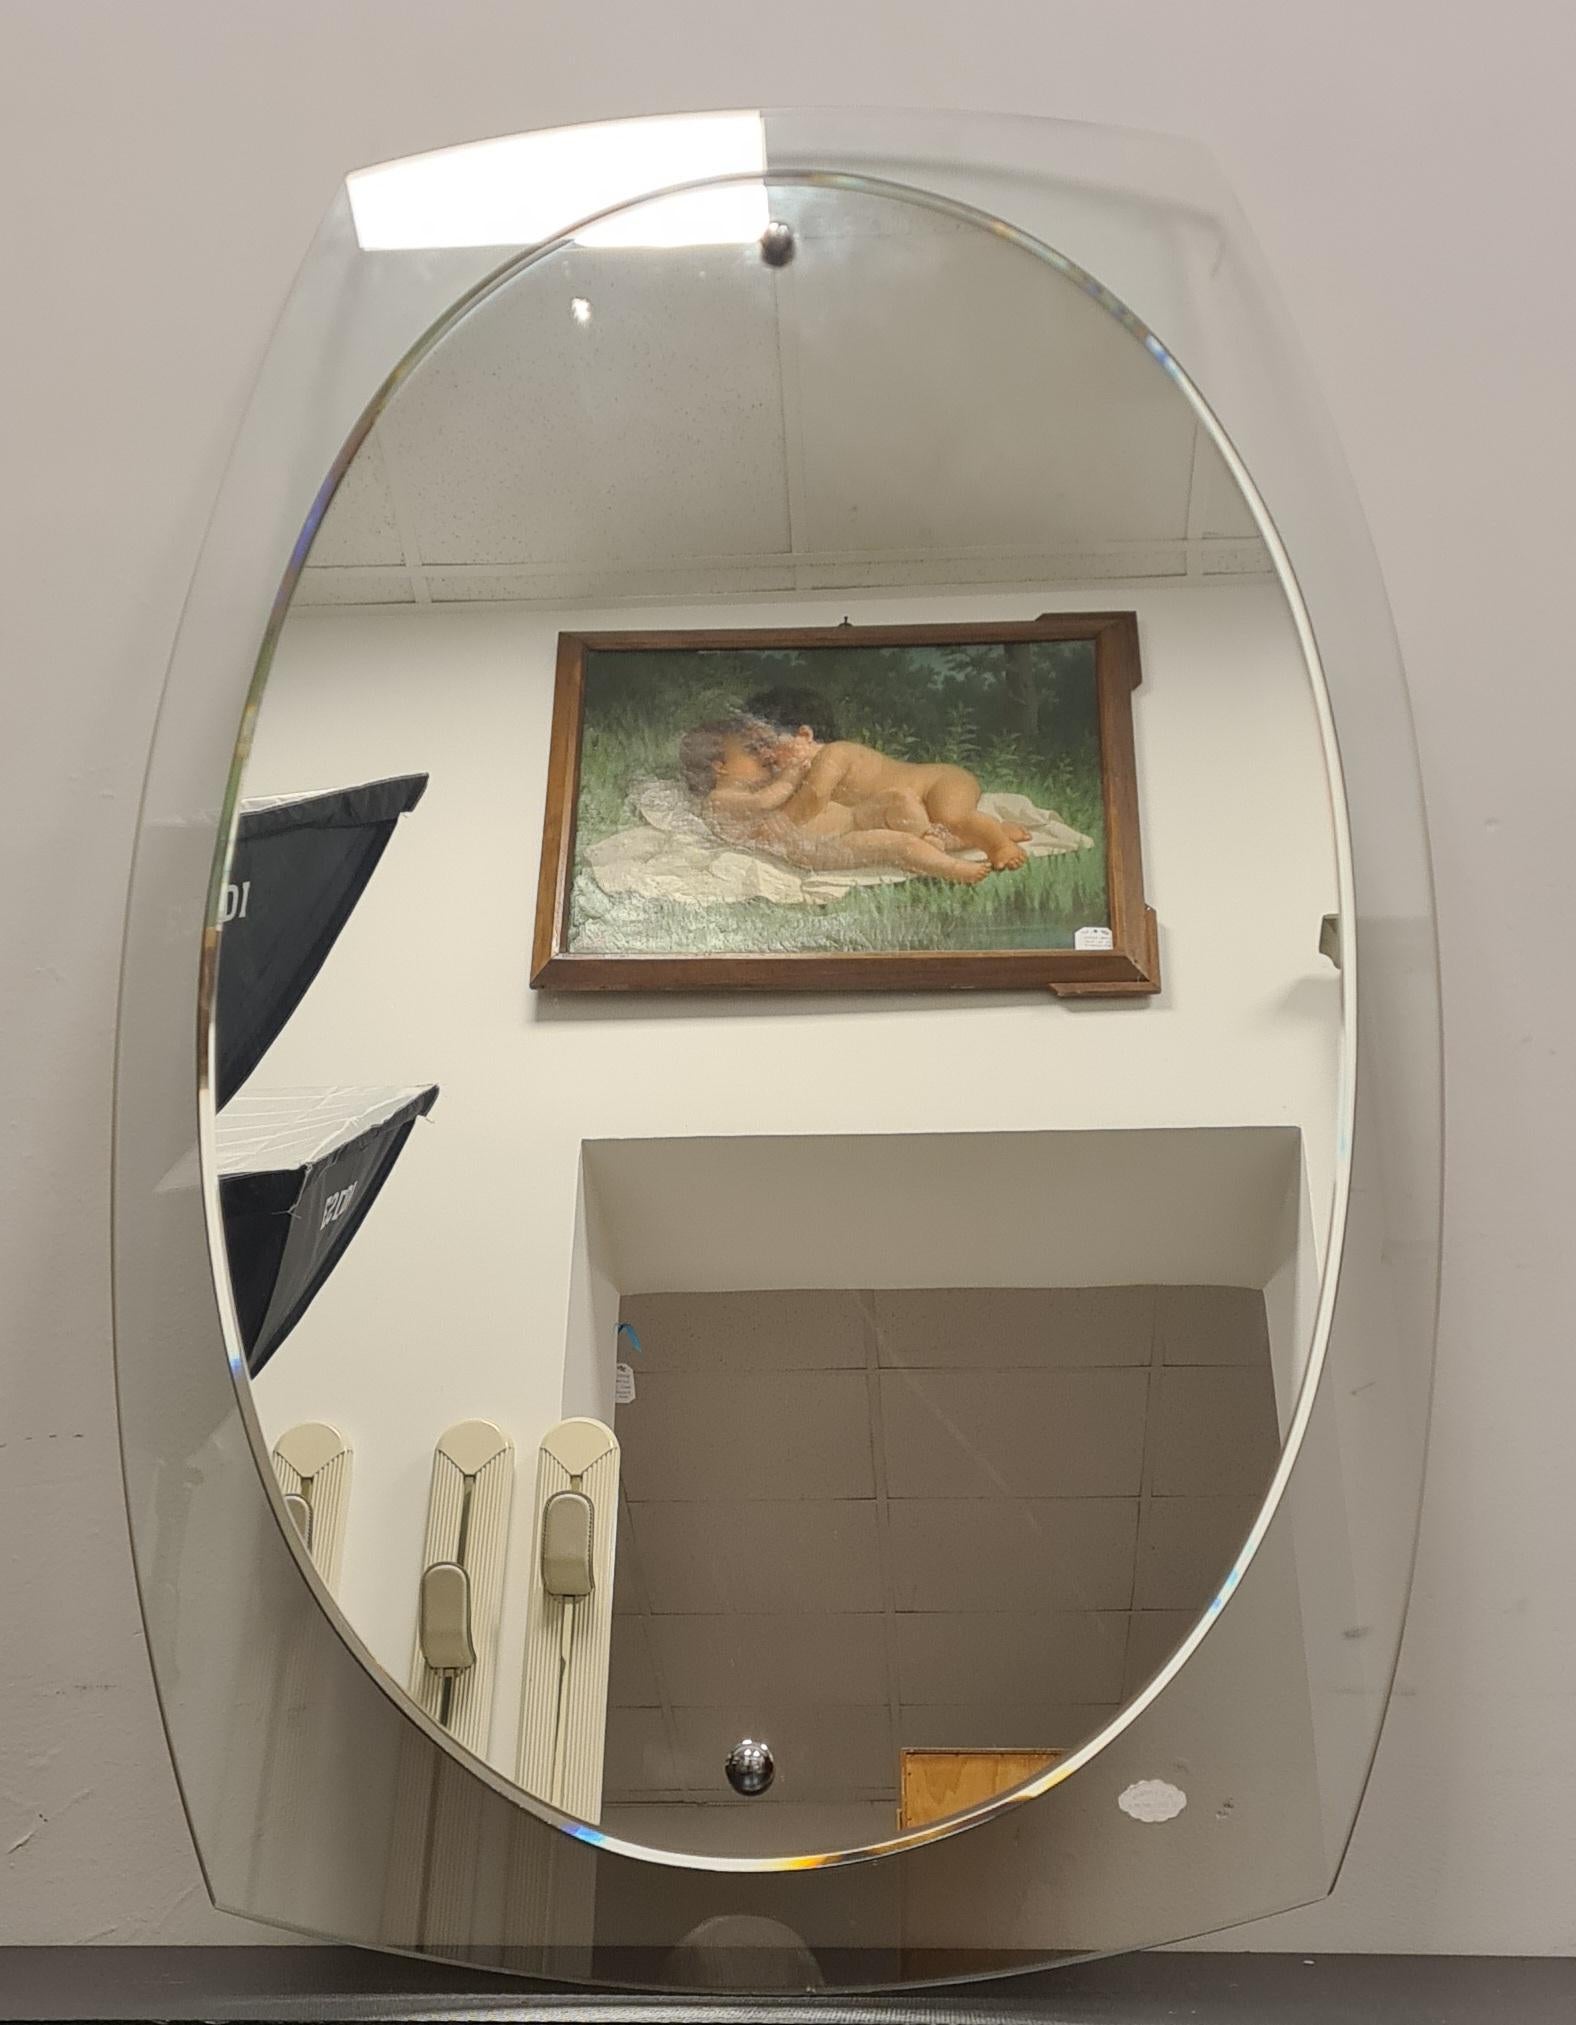 80' glass framed mirror

Sober and elegant mirror with clear beveled glass frame and chrome metal details.

This mirror is ideal to be placed in any setting as its design makes it adaptable to different environments.

The mirror presents itself